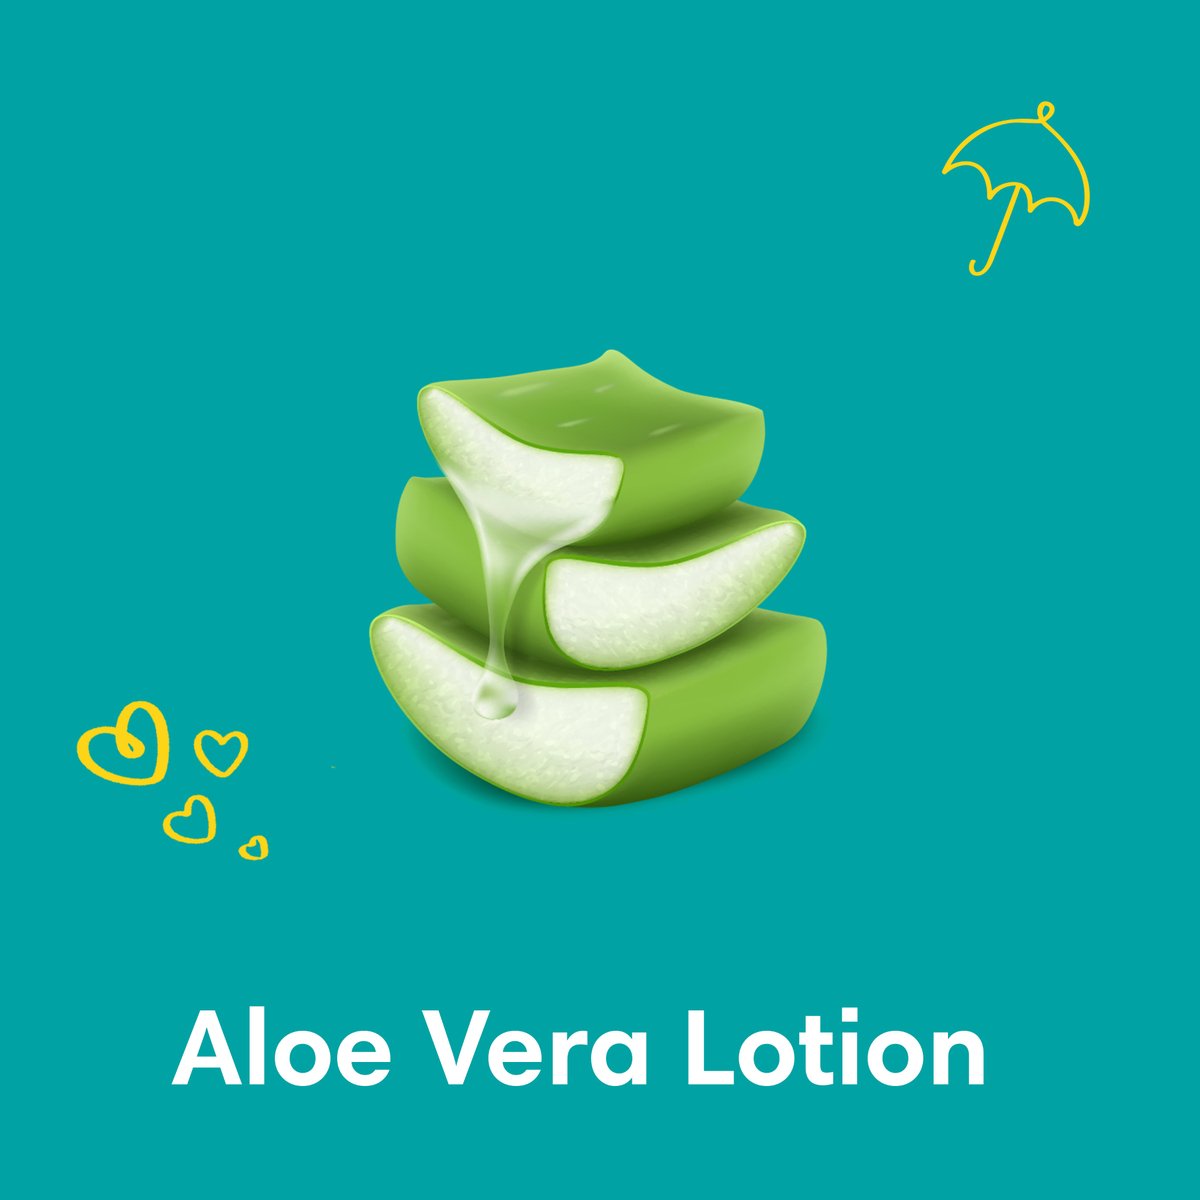 Pampers Baby-Dry Taped Diapers with Aloe Vera Lotion, up to 100% Leakage Protection Size 6 13+kg 48 pcs